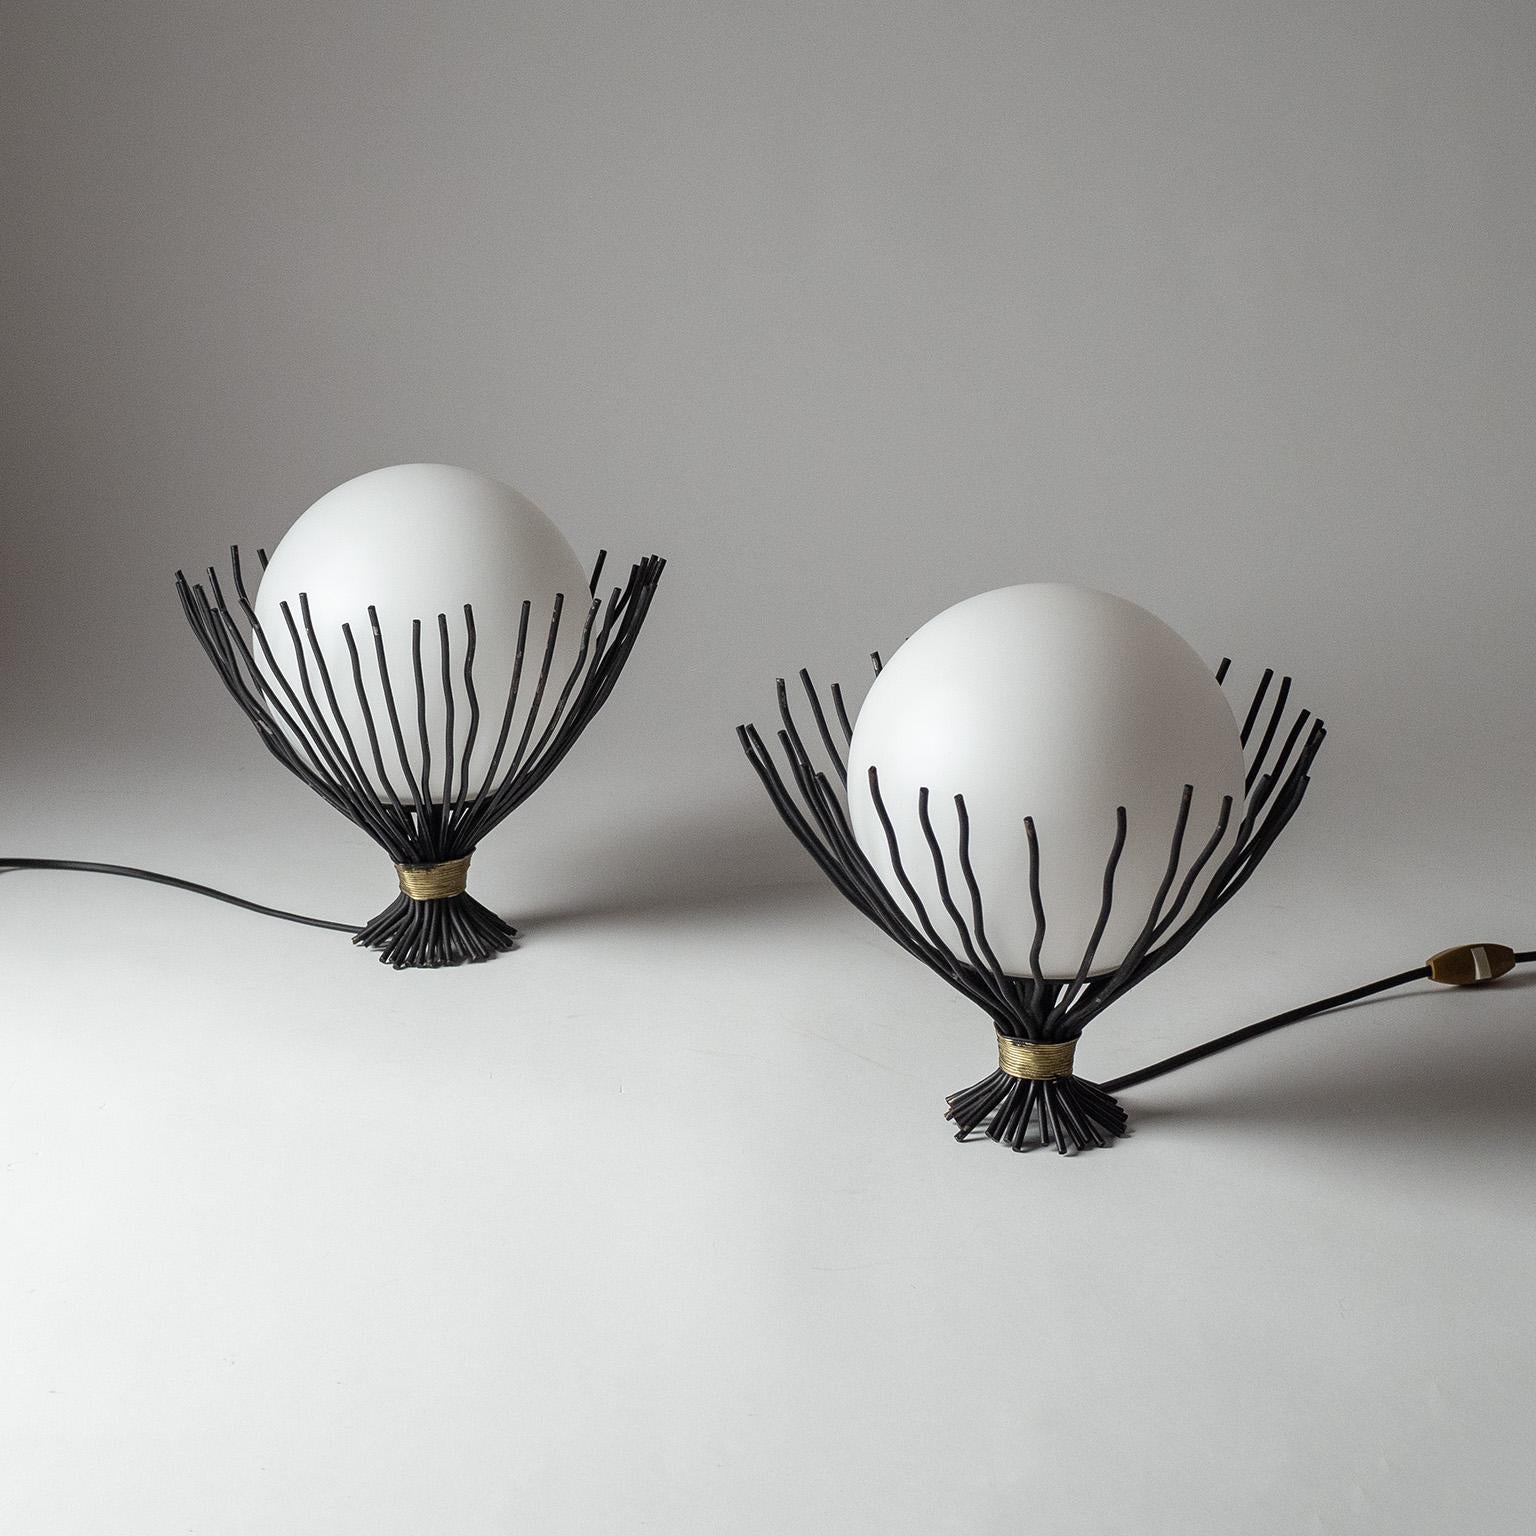 French Iron and Glass Table Lamps, 1960s For Sale 2